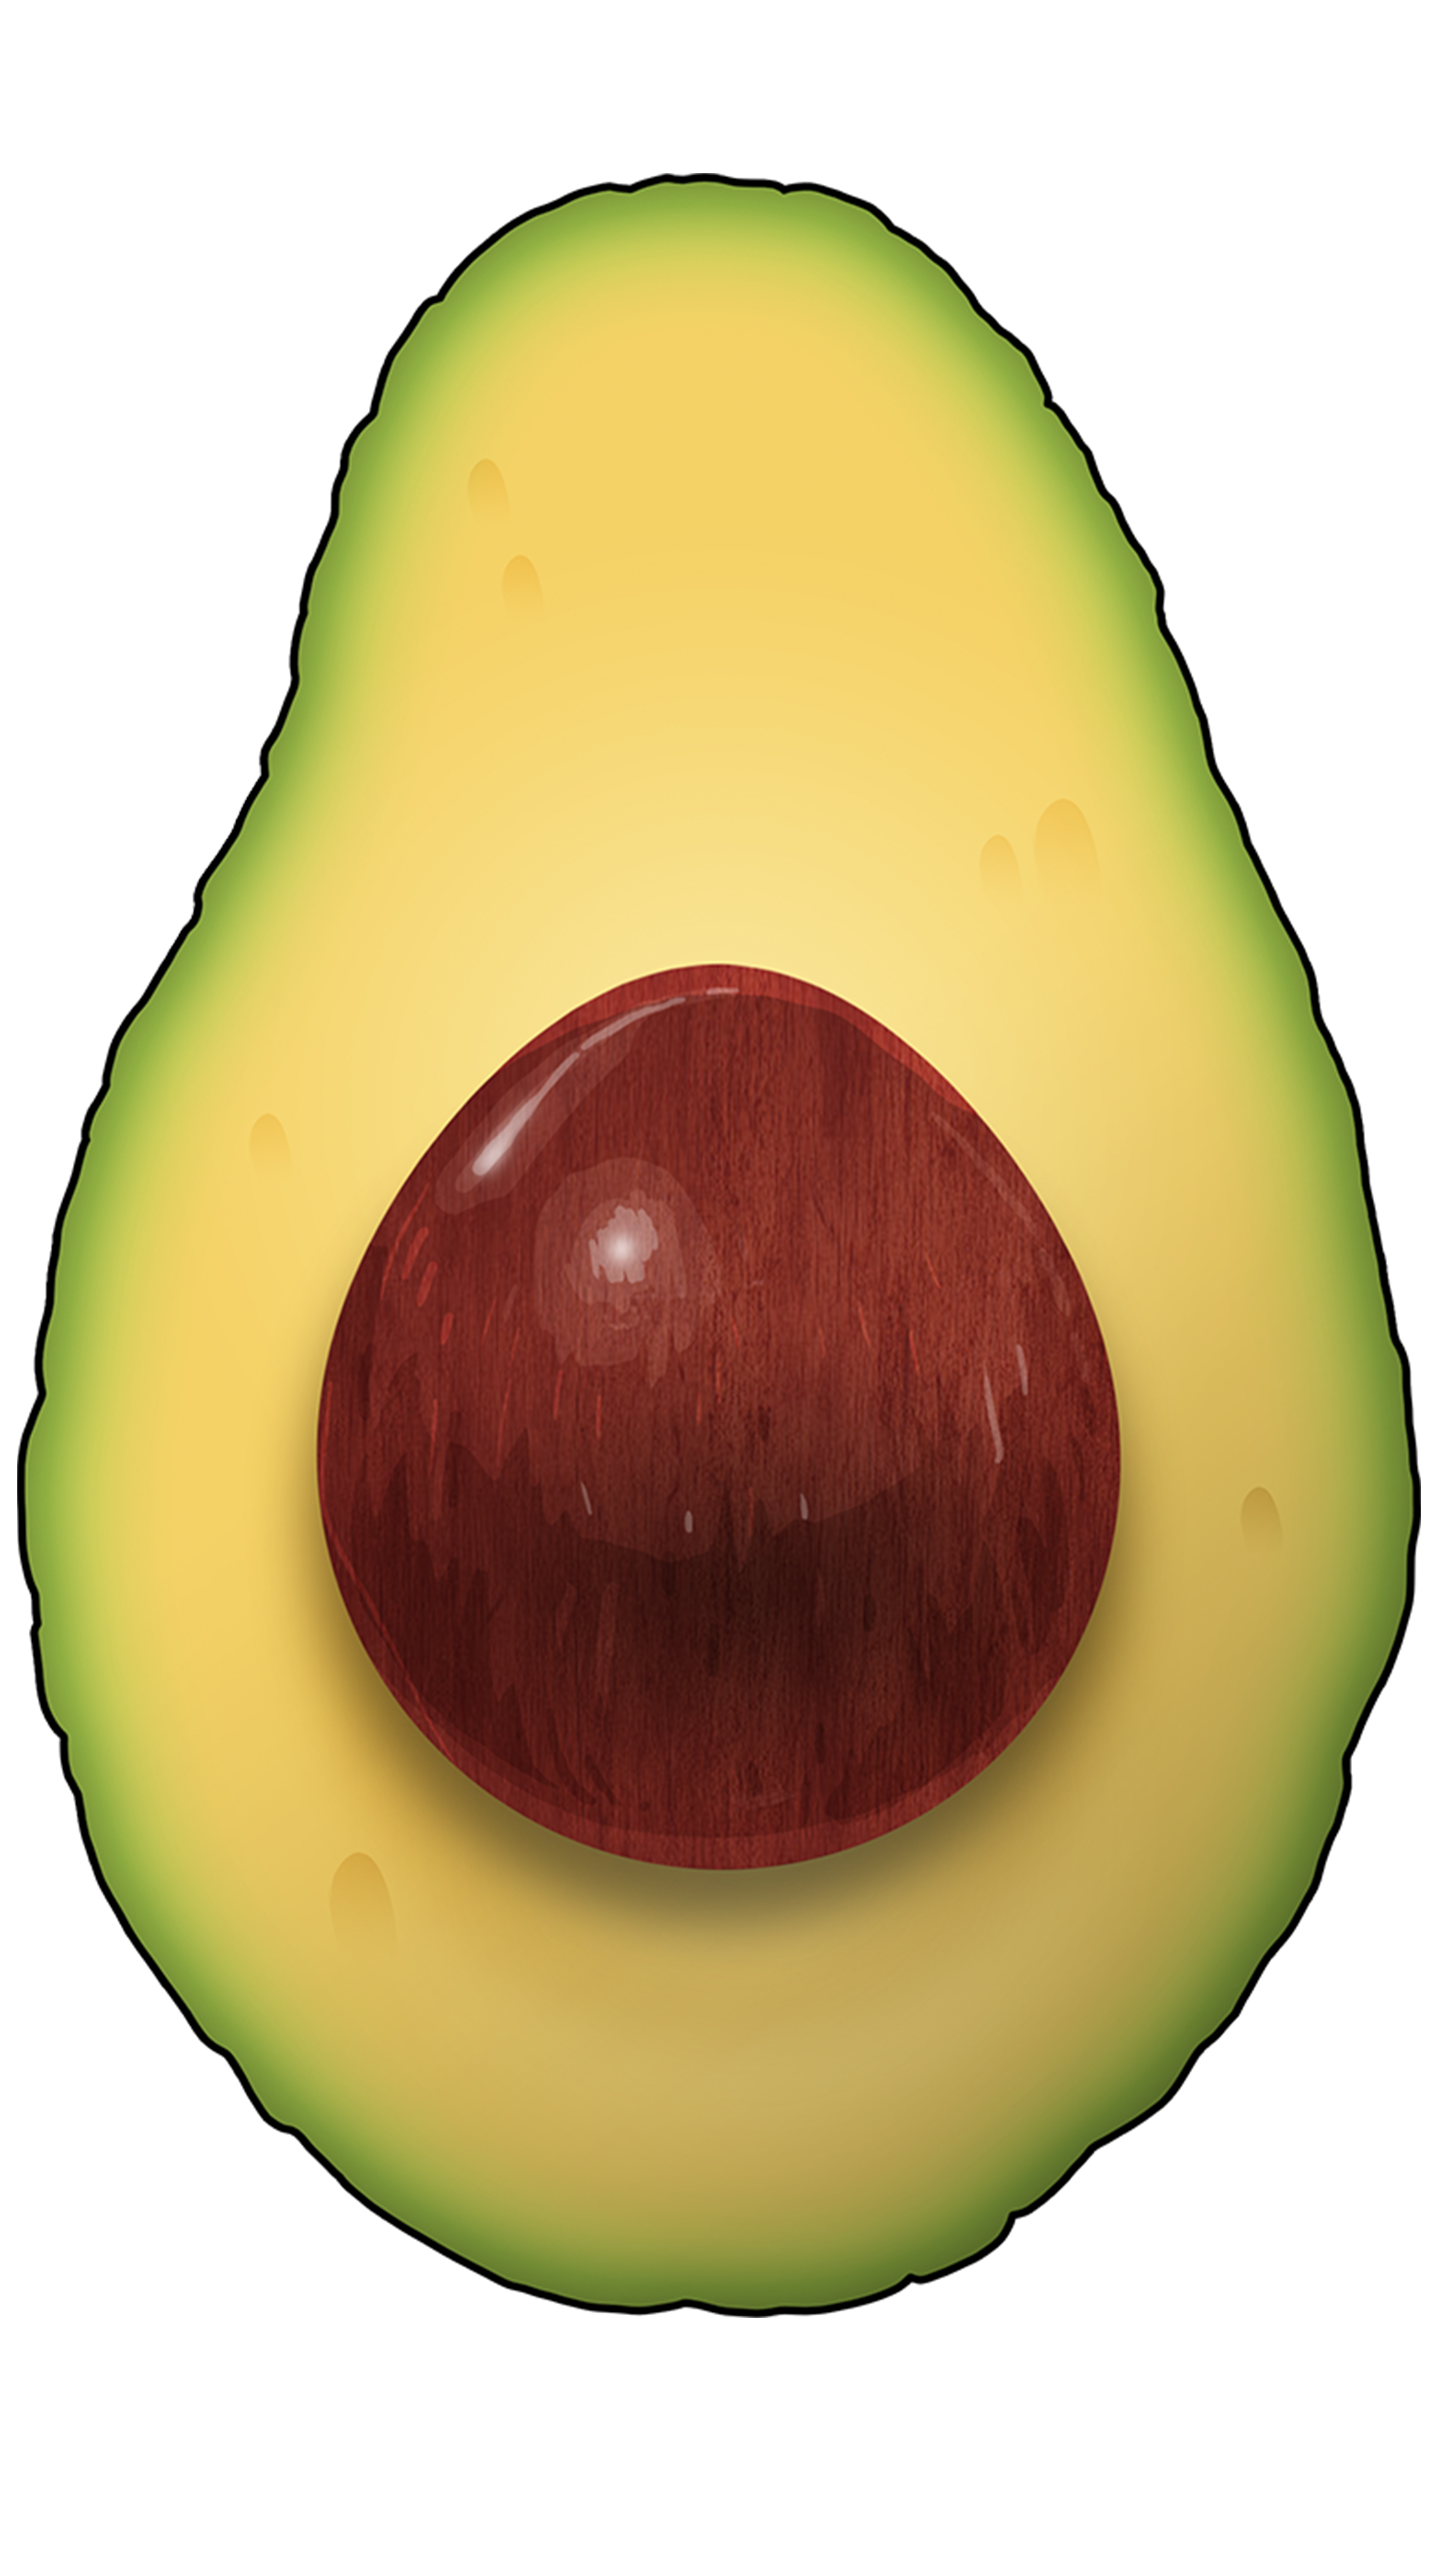 Healthy clipart nutritional food. Avocados a natural way